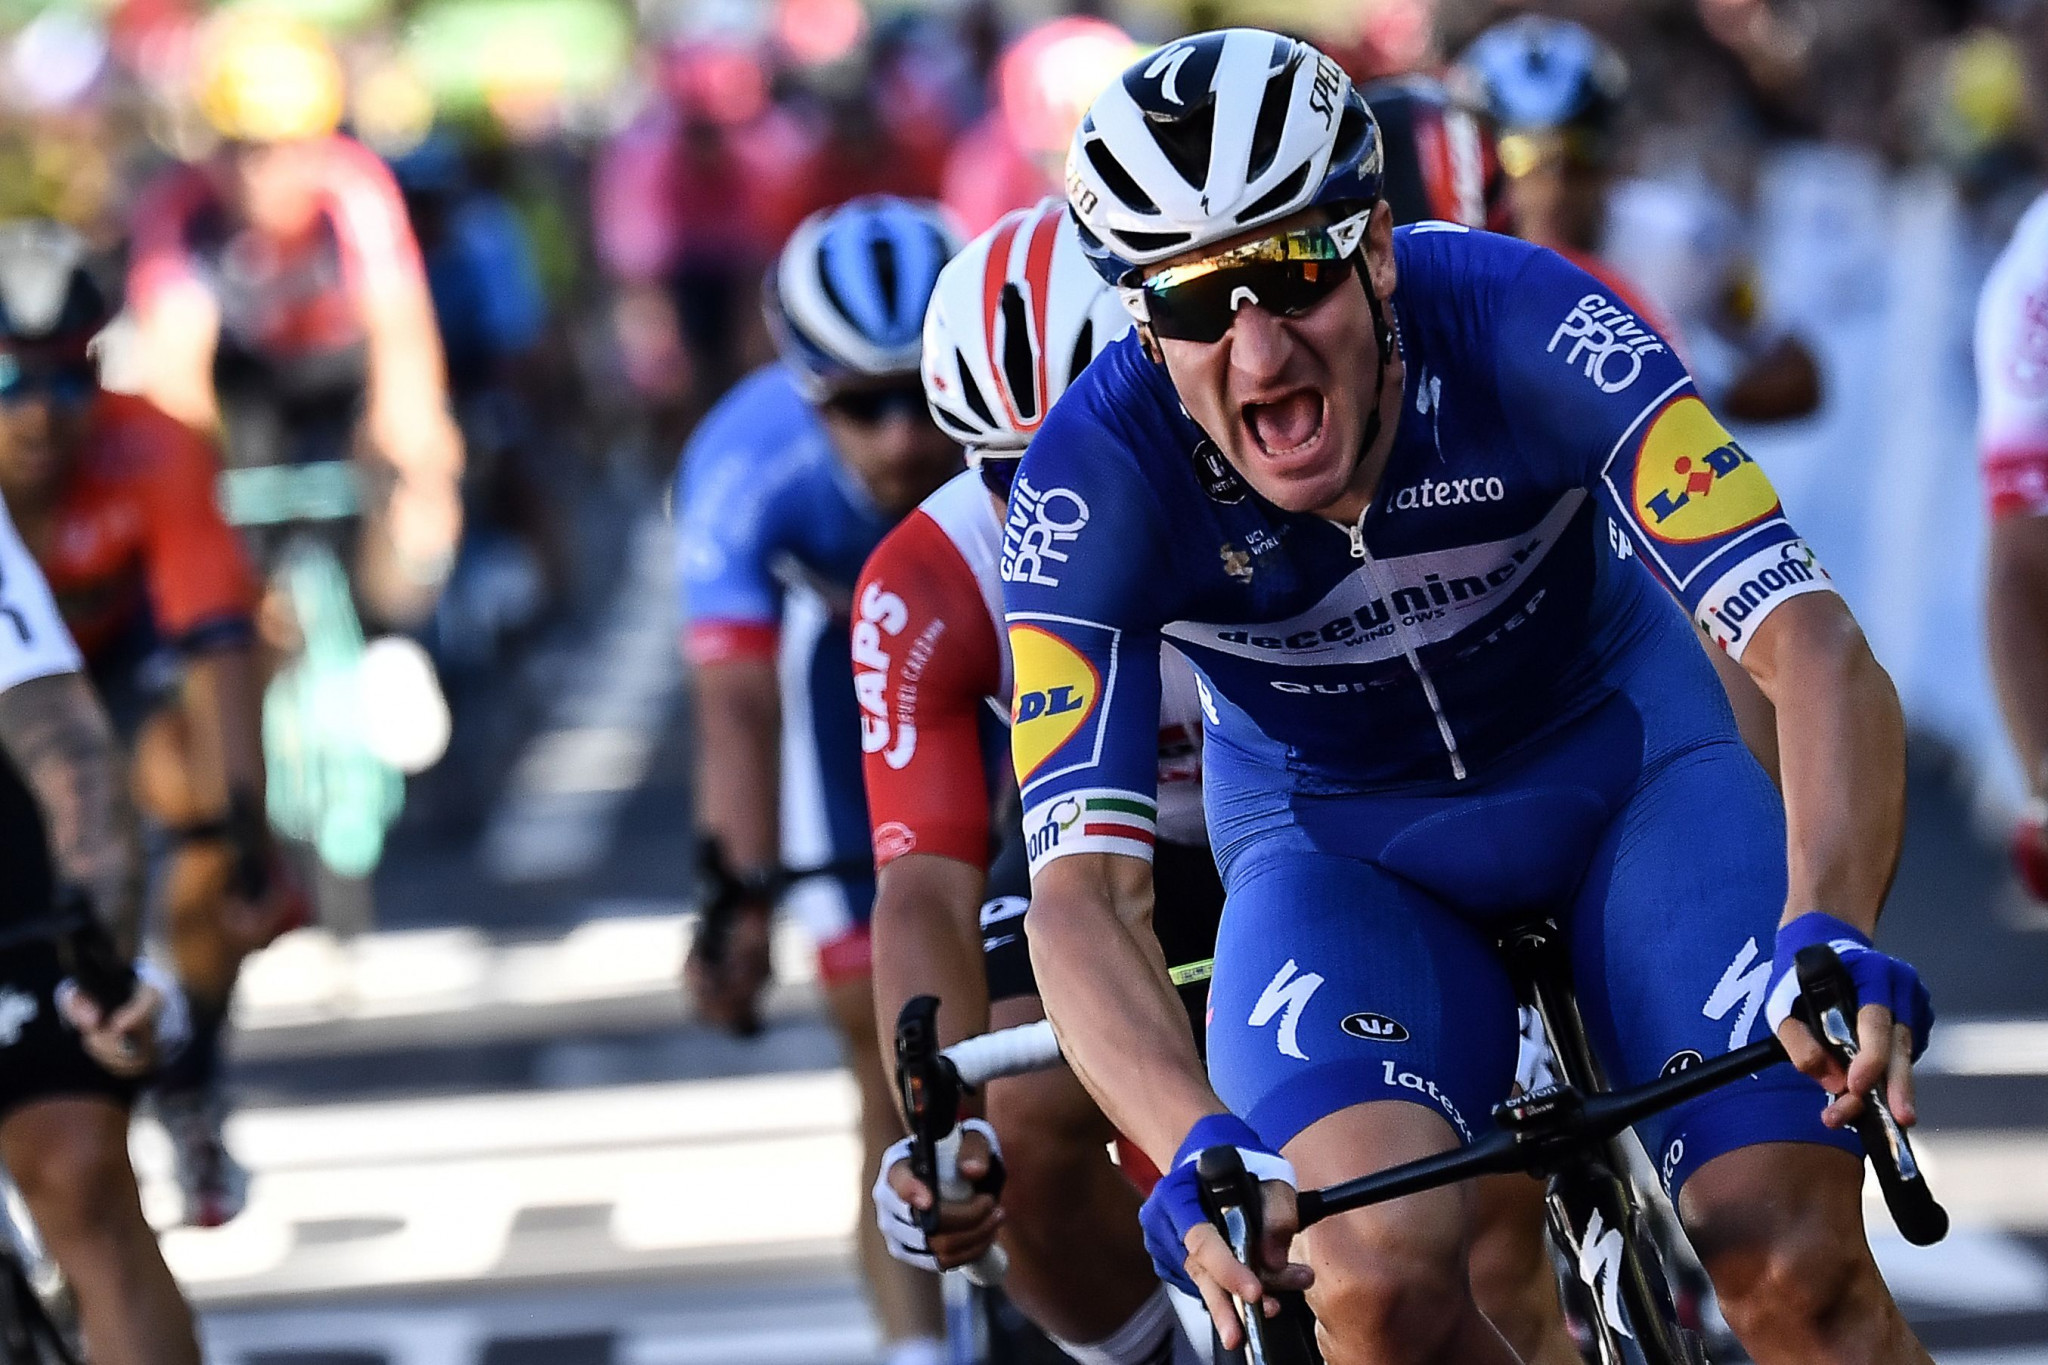 Viviani takes first Tour de France victory as Alaphilippe retains overall lead